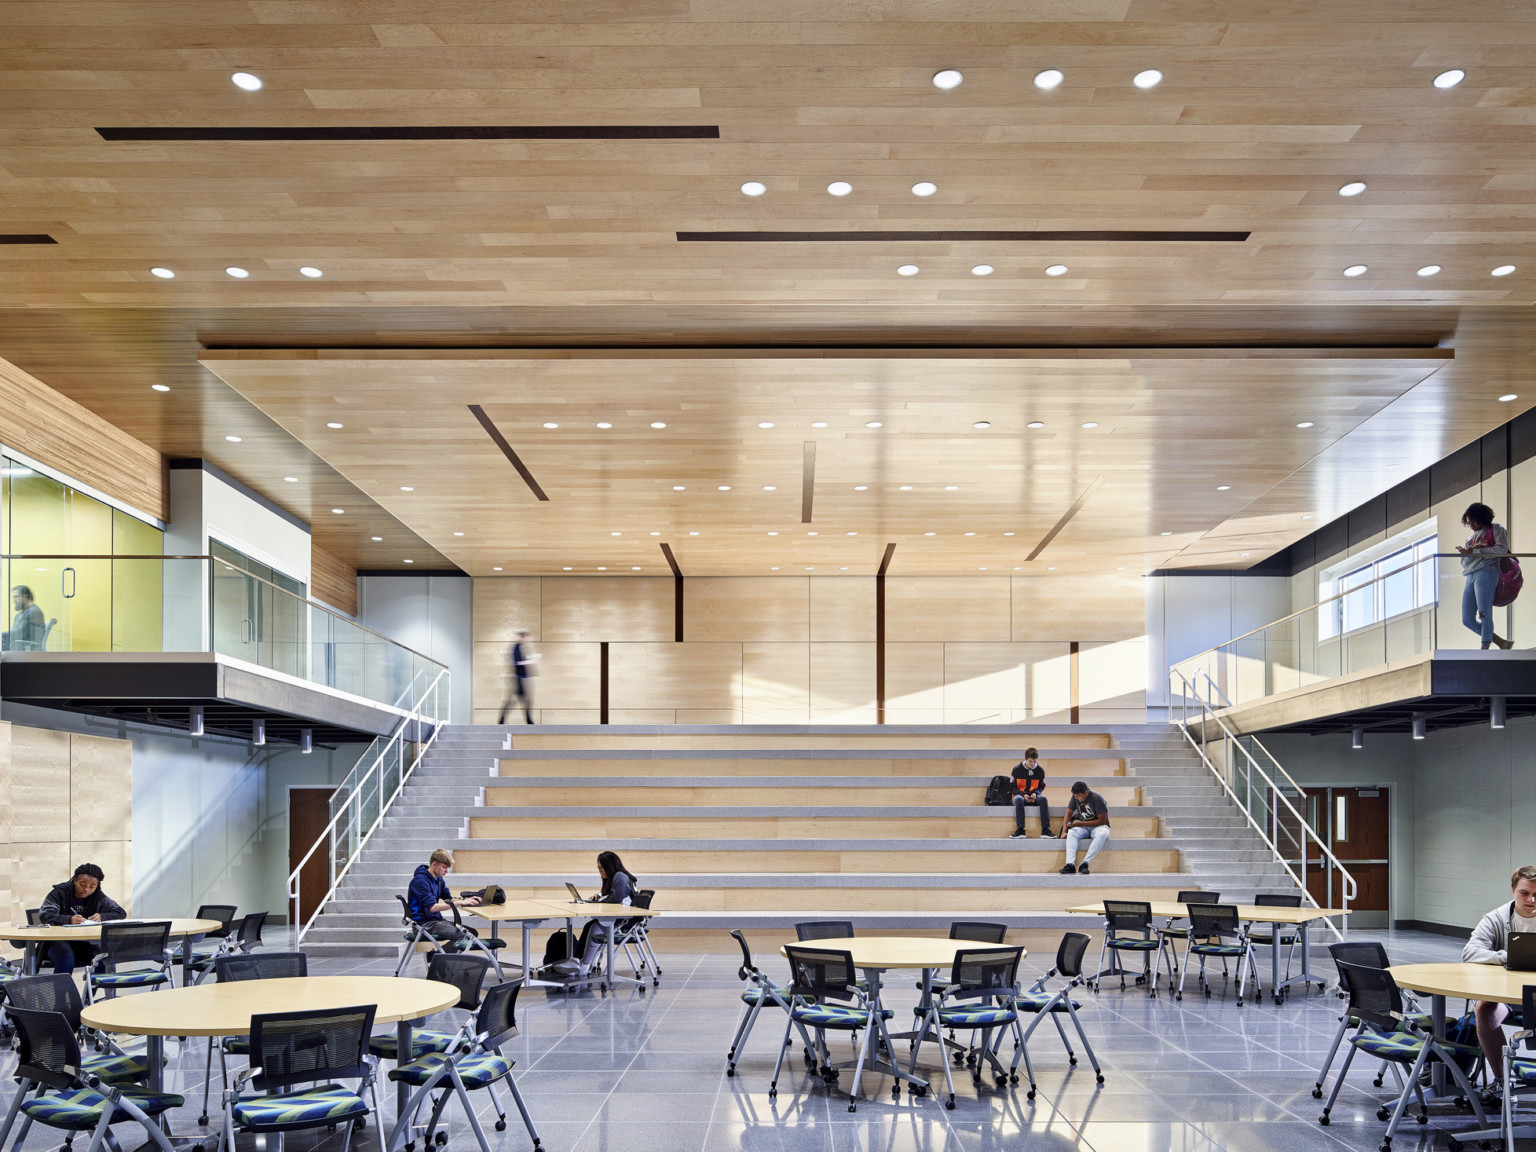 Learning staircase made from wood with ample lighting and learning pods on the side, dining area at the bottom at TCALC